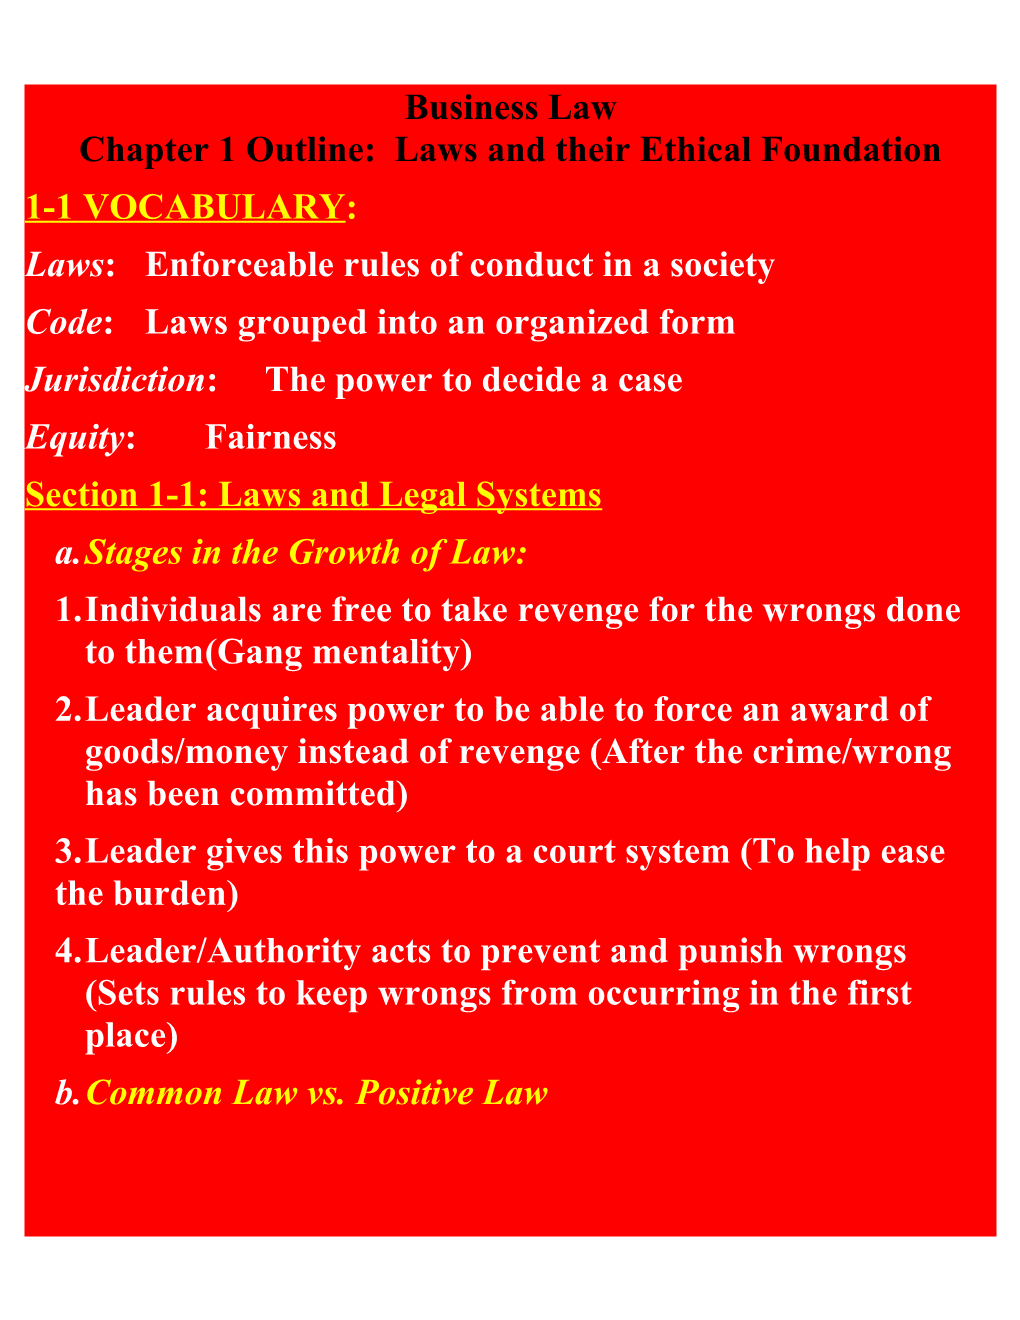 Chapter 1 Outline: Laws and Their Ethical Foundation